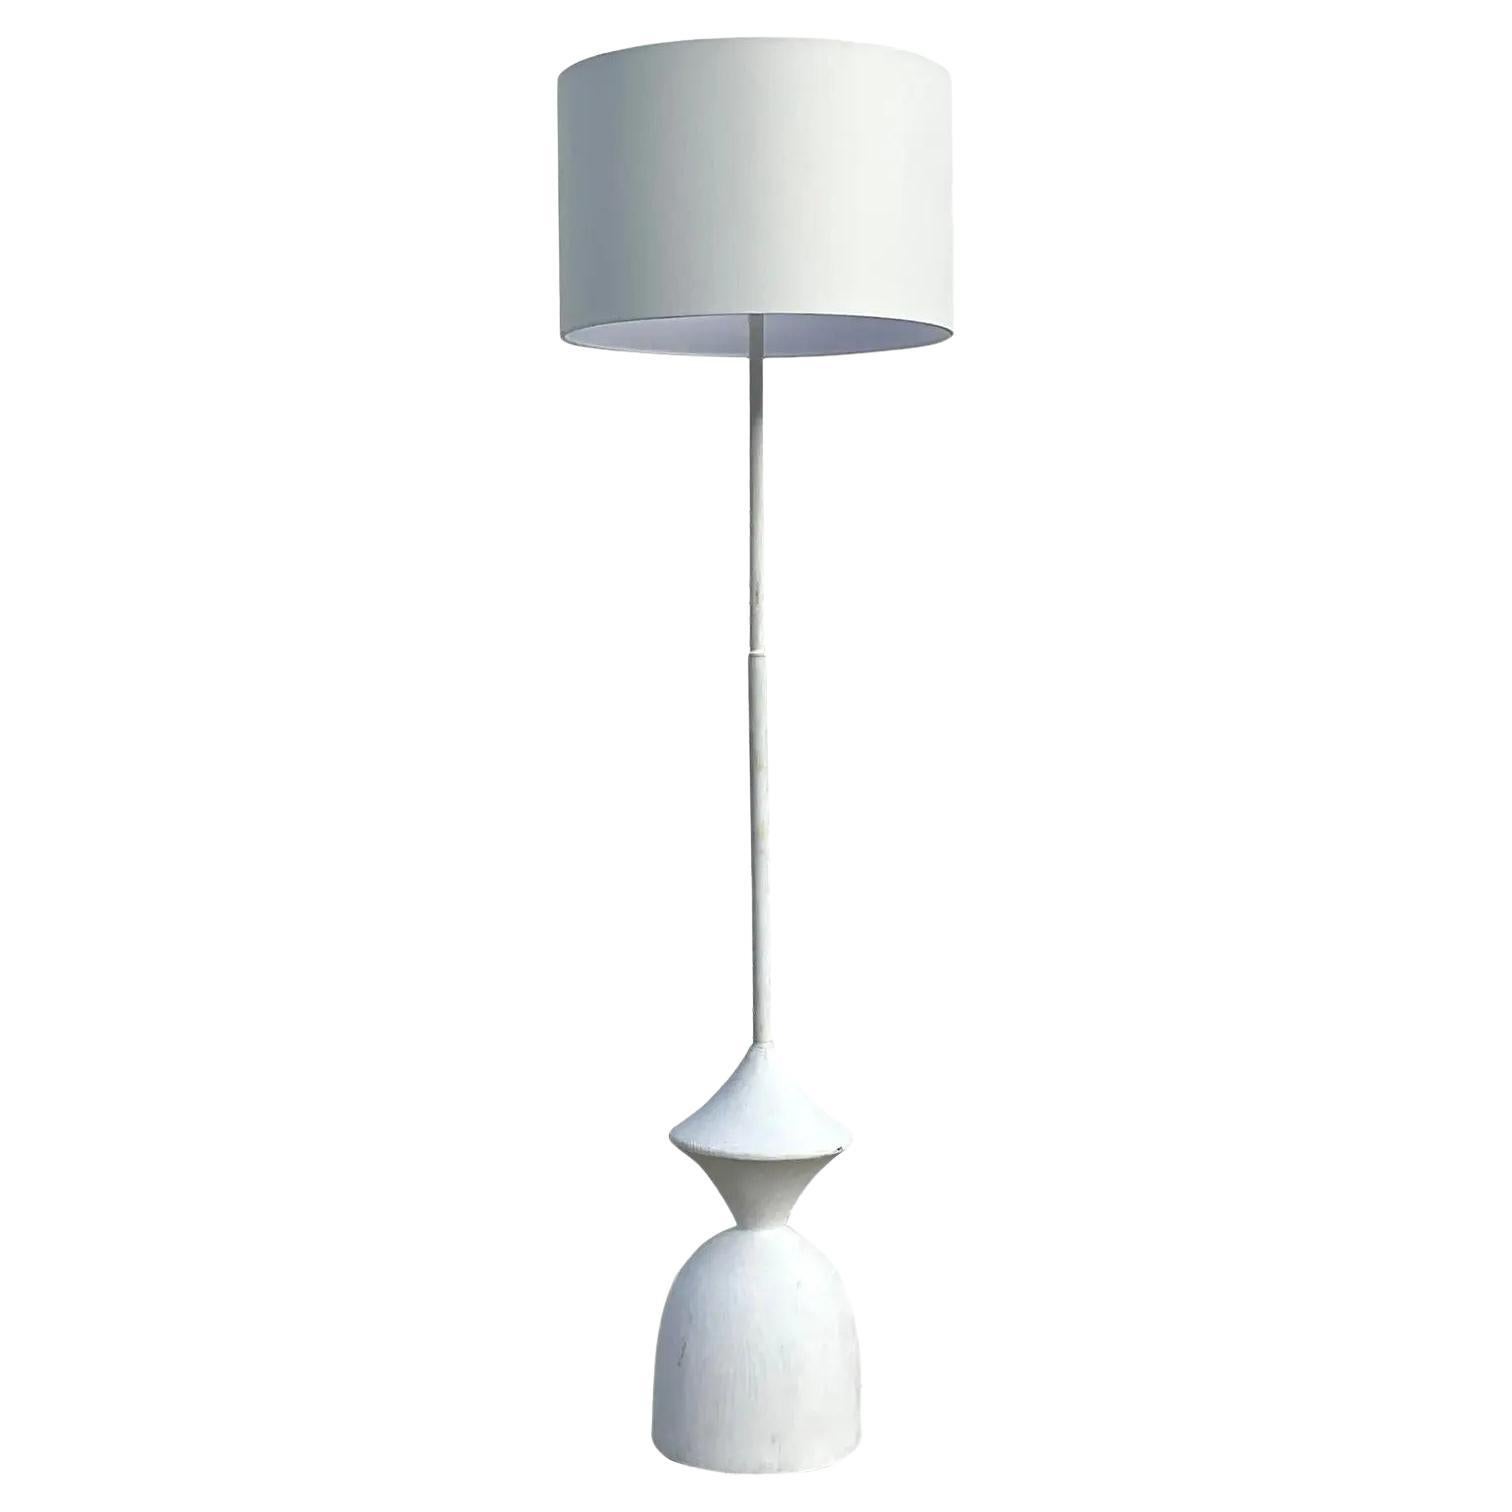 Vintage Contemporary Standing Floor Lamp For Sale at 1stDibs